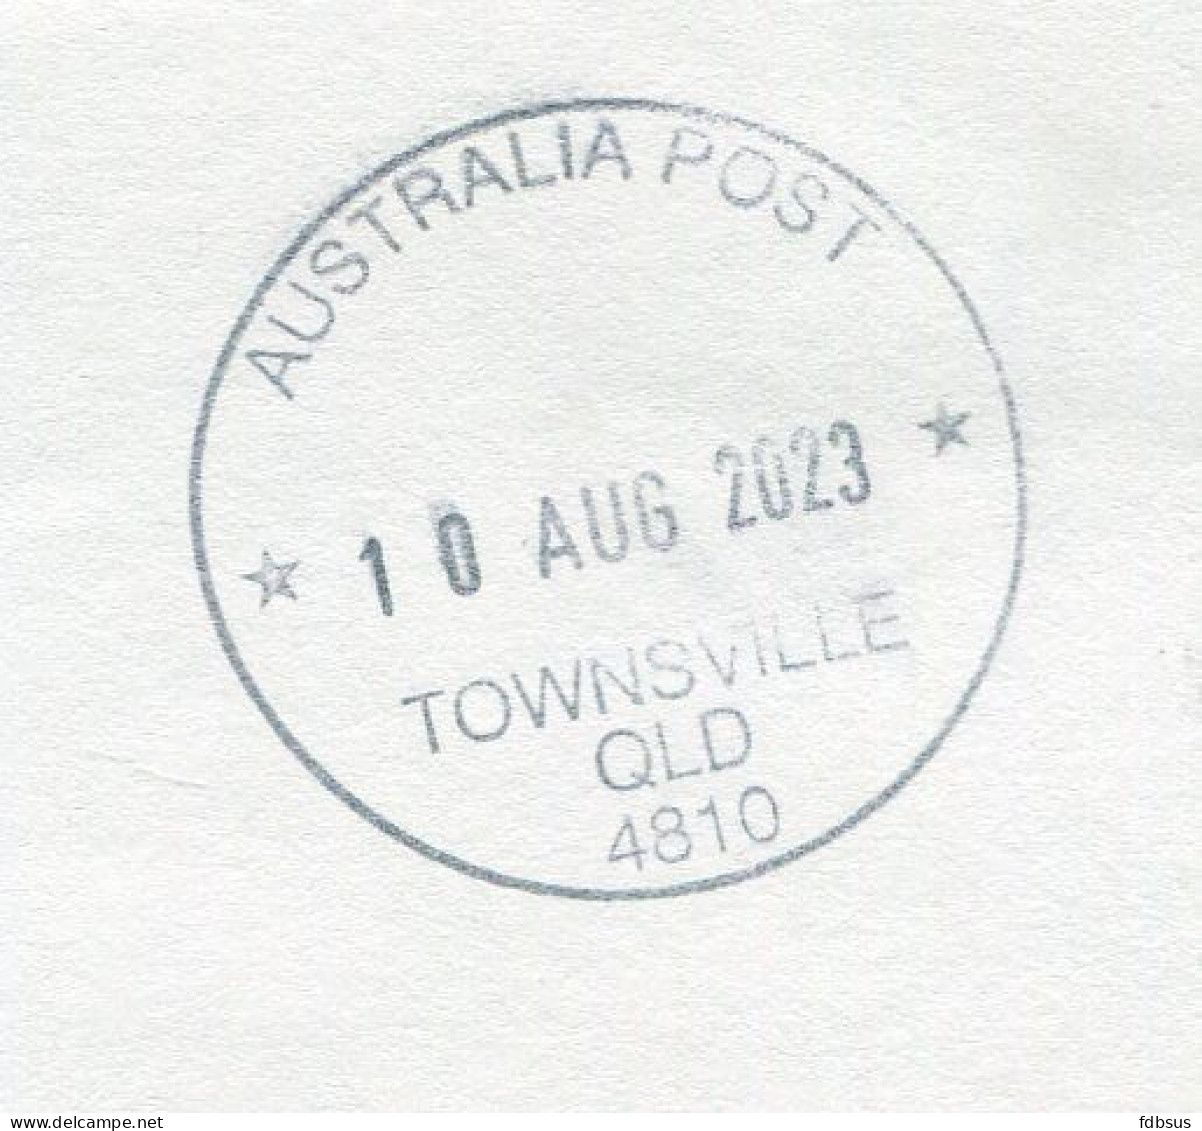 Aug. 2023 Cover From Belgium To Townsville Australia - Returned Back 23/2/2024 - See Postal Markings RTS - Australia Pos - Covers & Documents